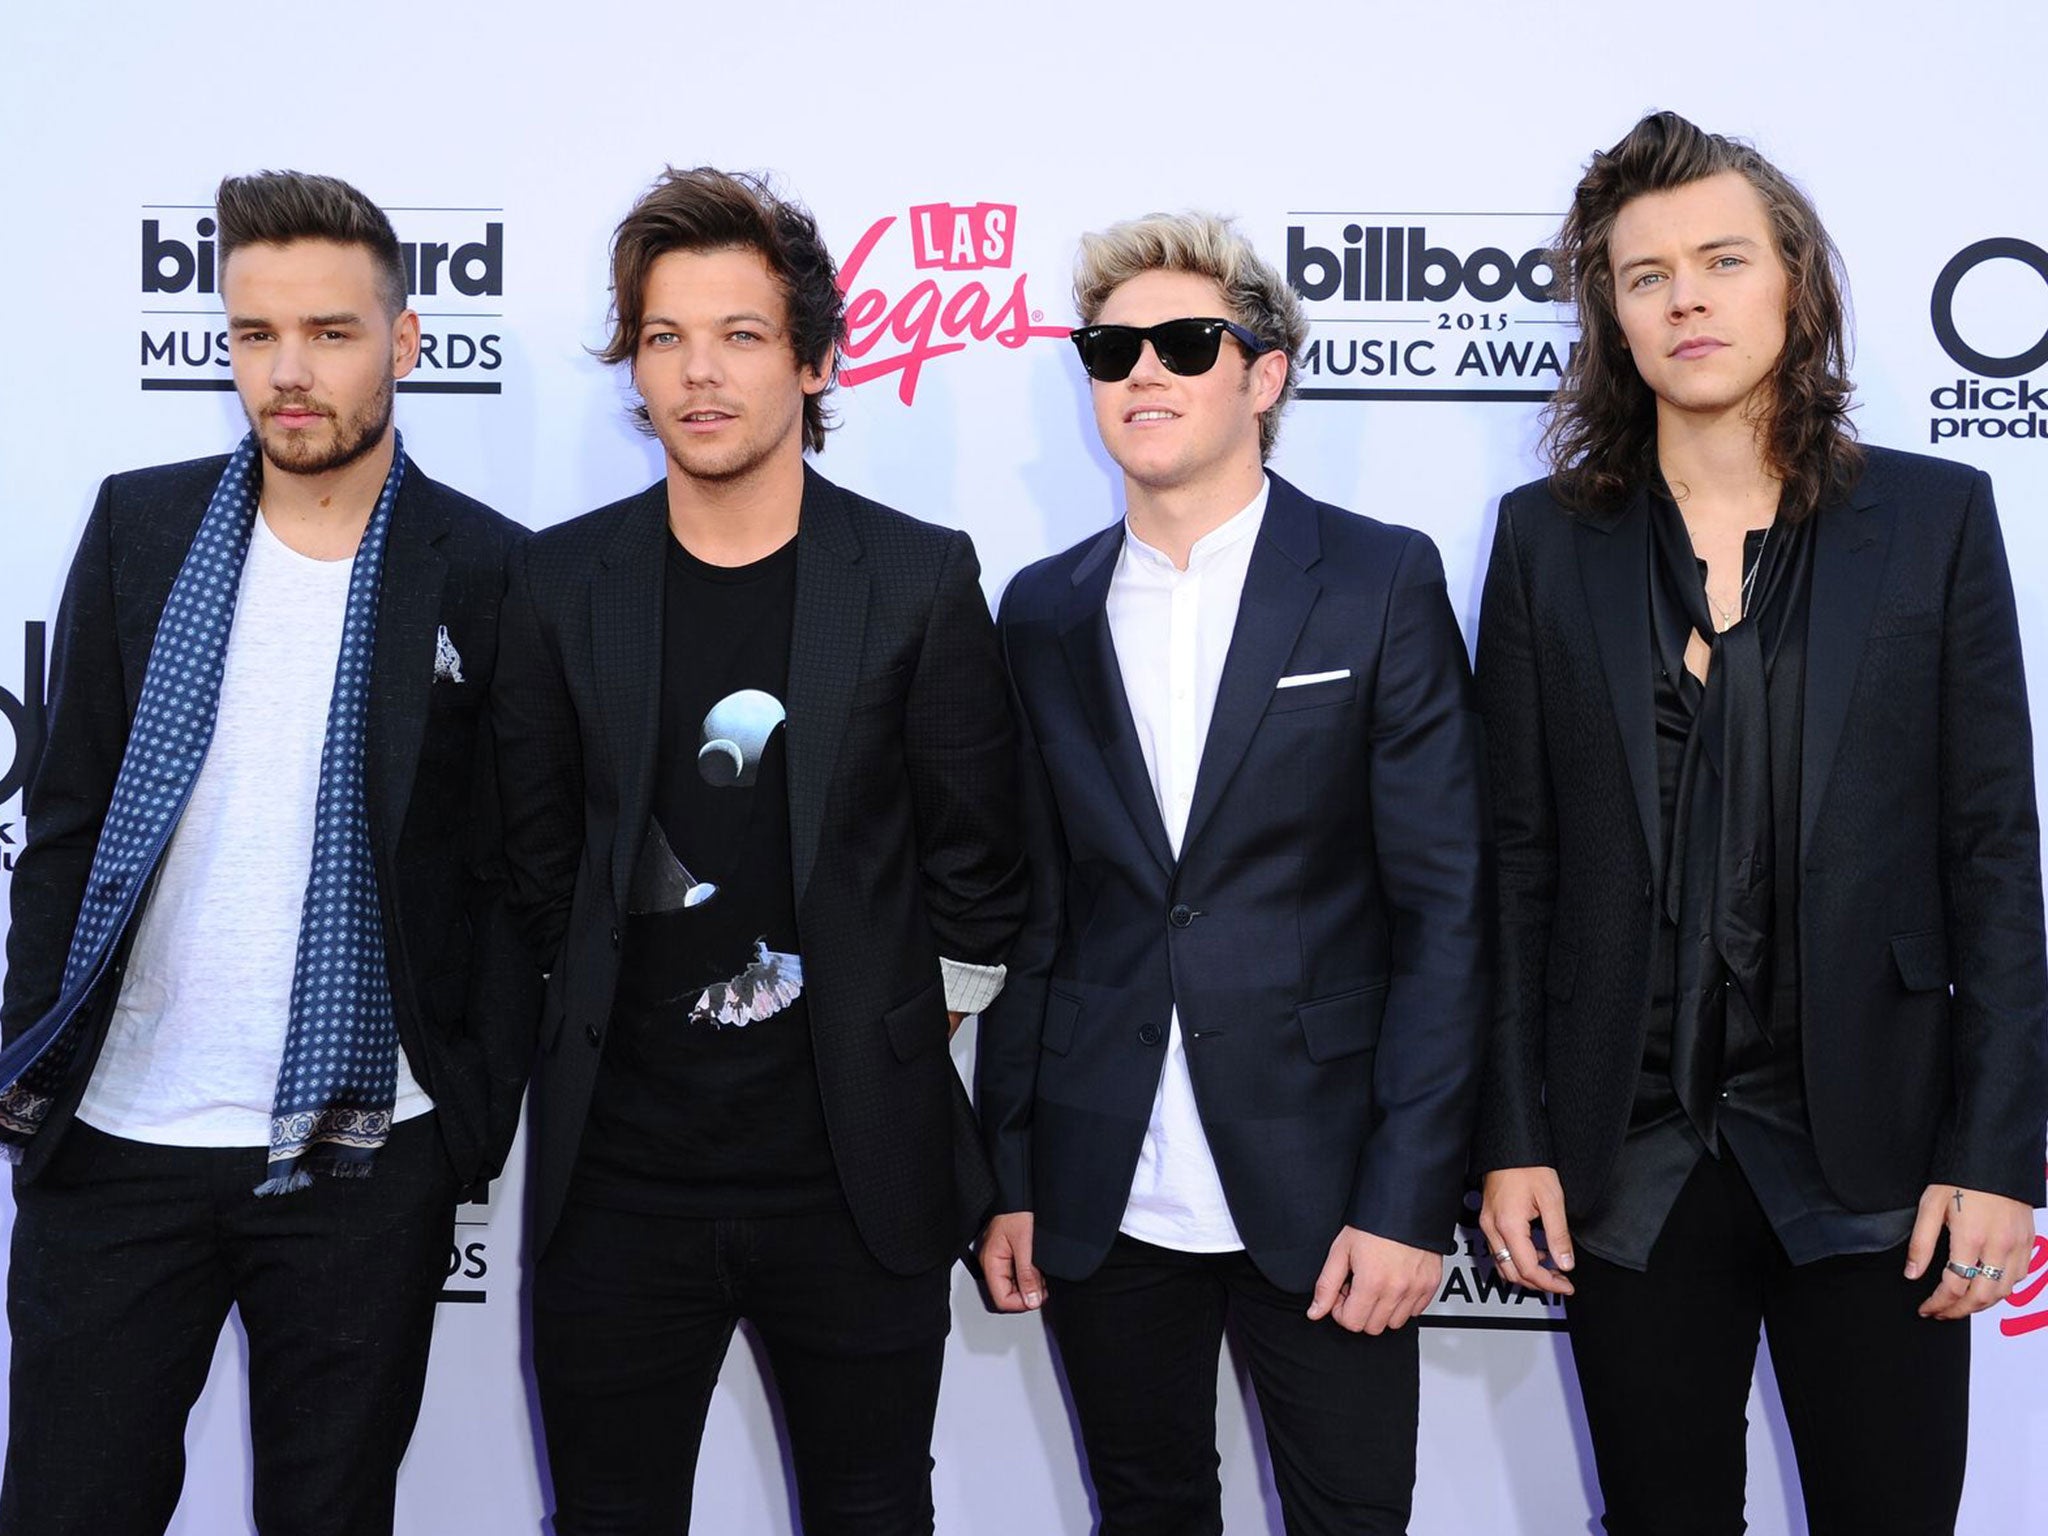 Why And When Did One Direction Break-Up? Their Hiatus Explained - Capital